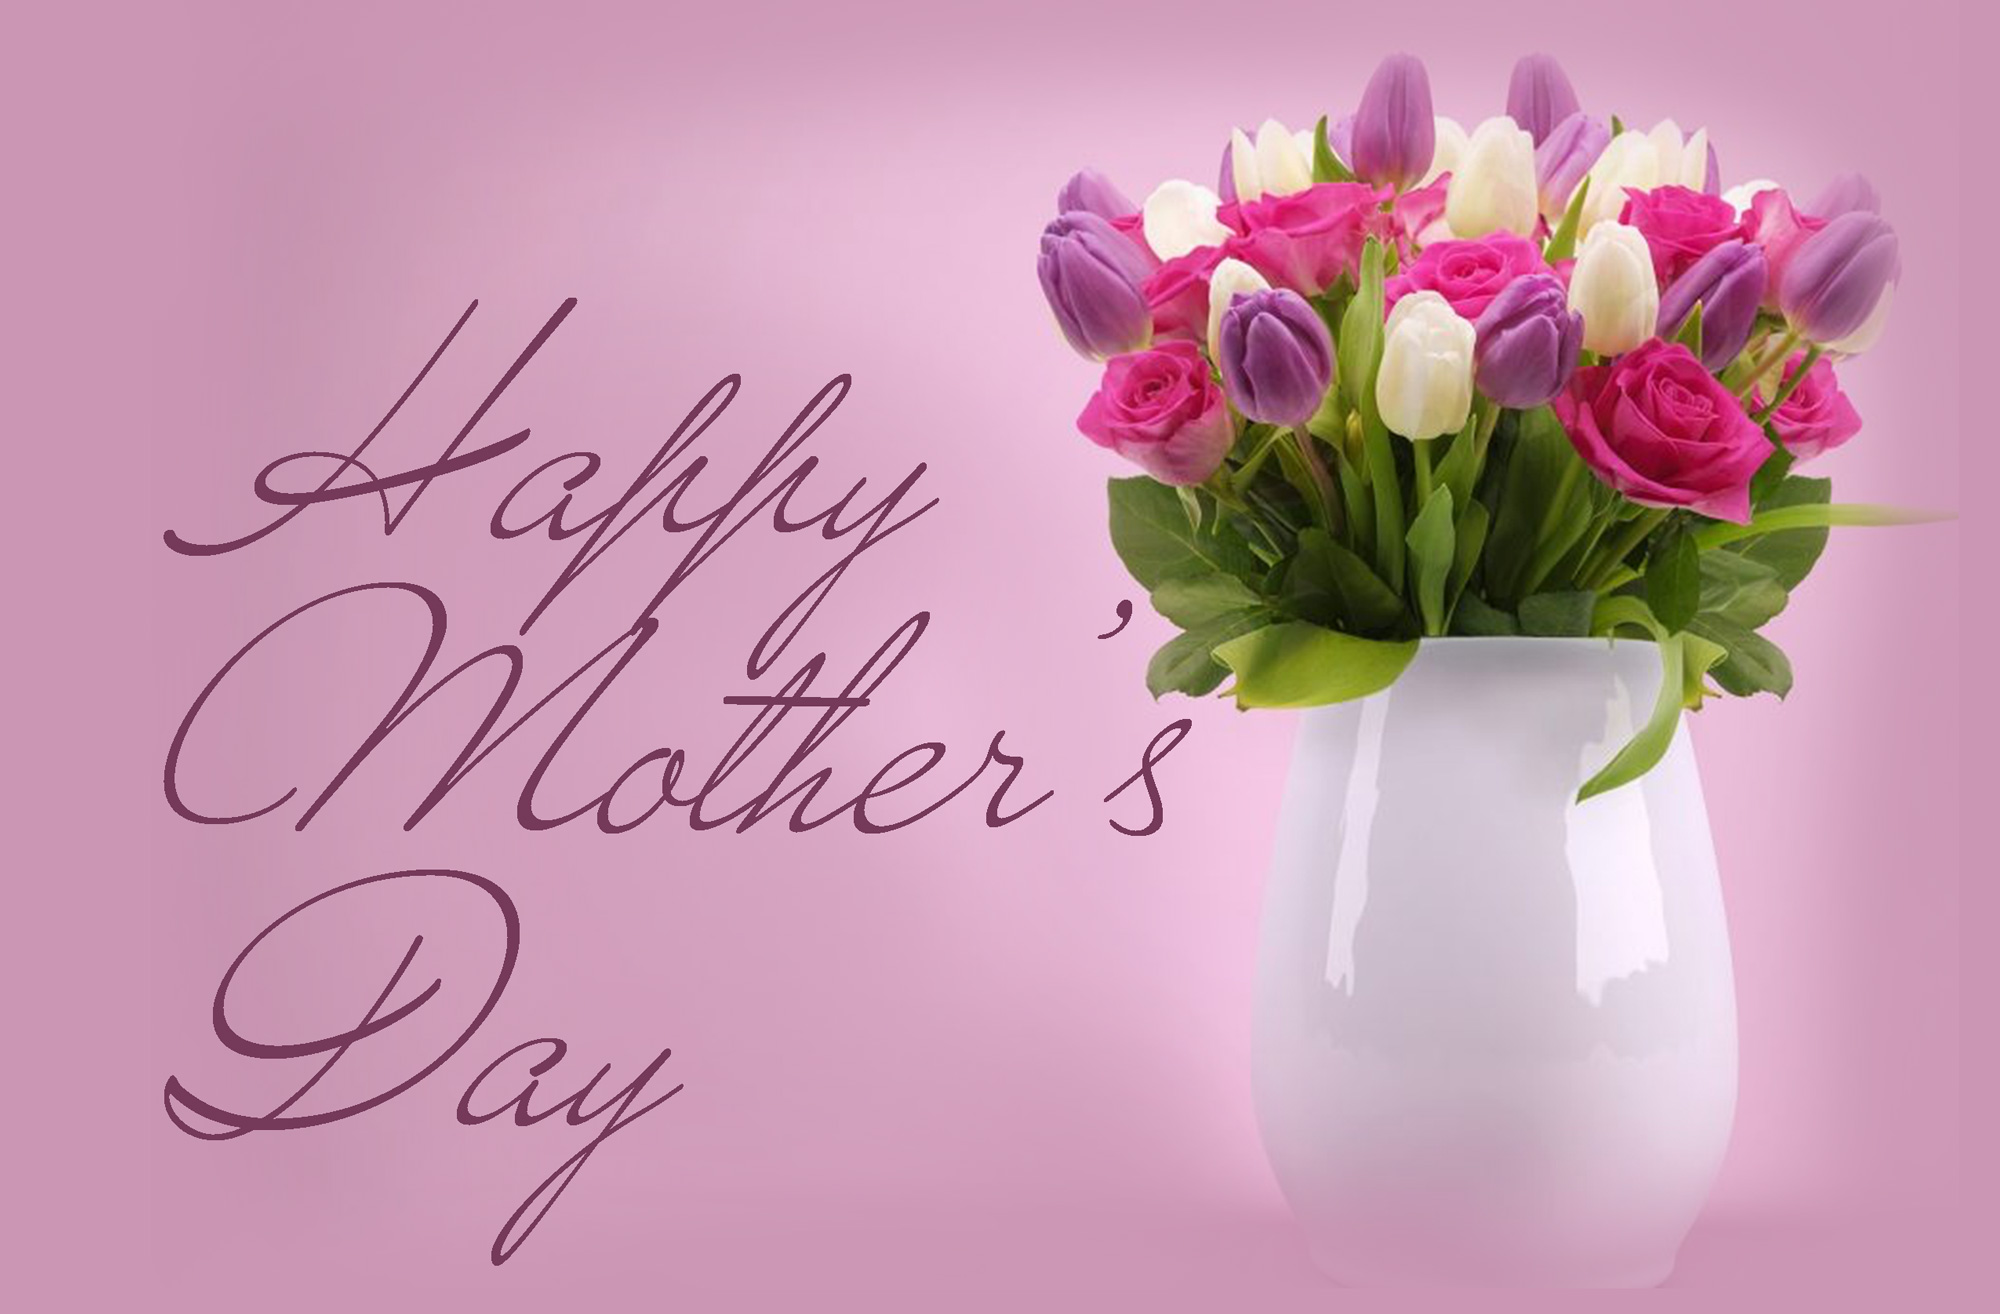 Happy Mothers Day - The Arbors Assisted Living Community